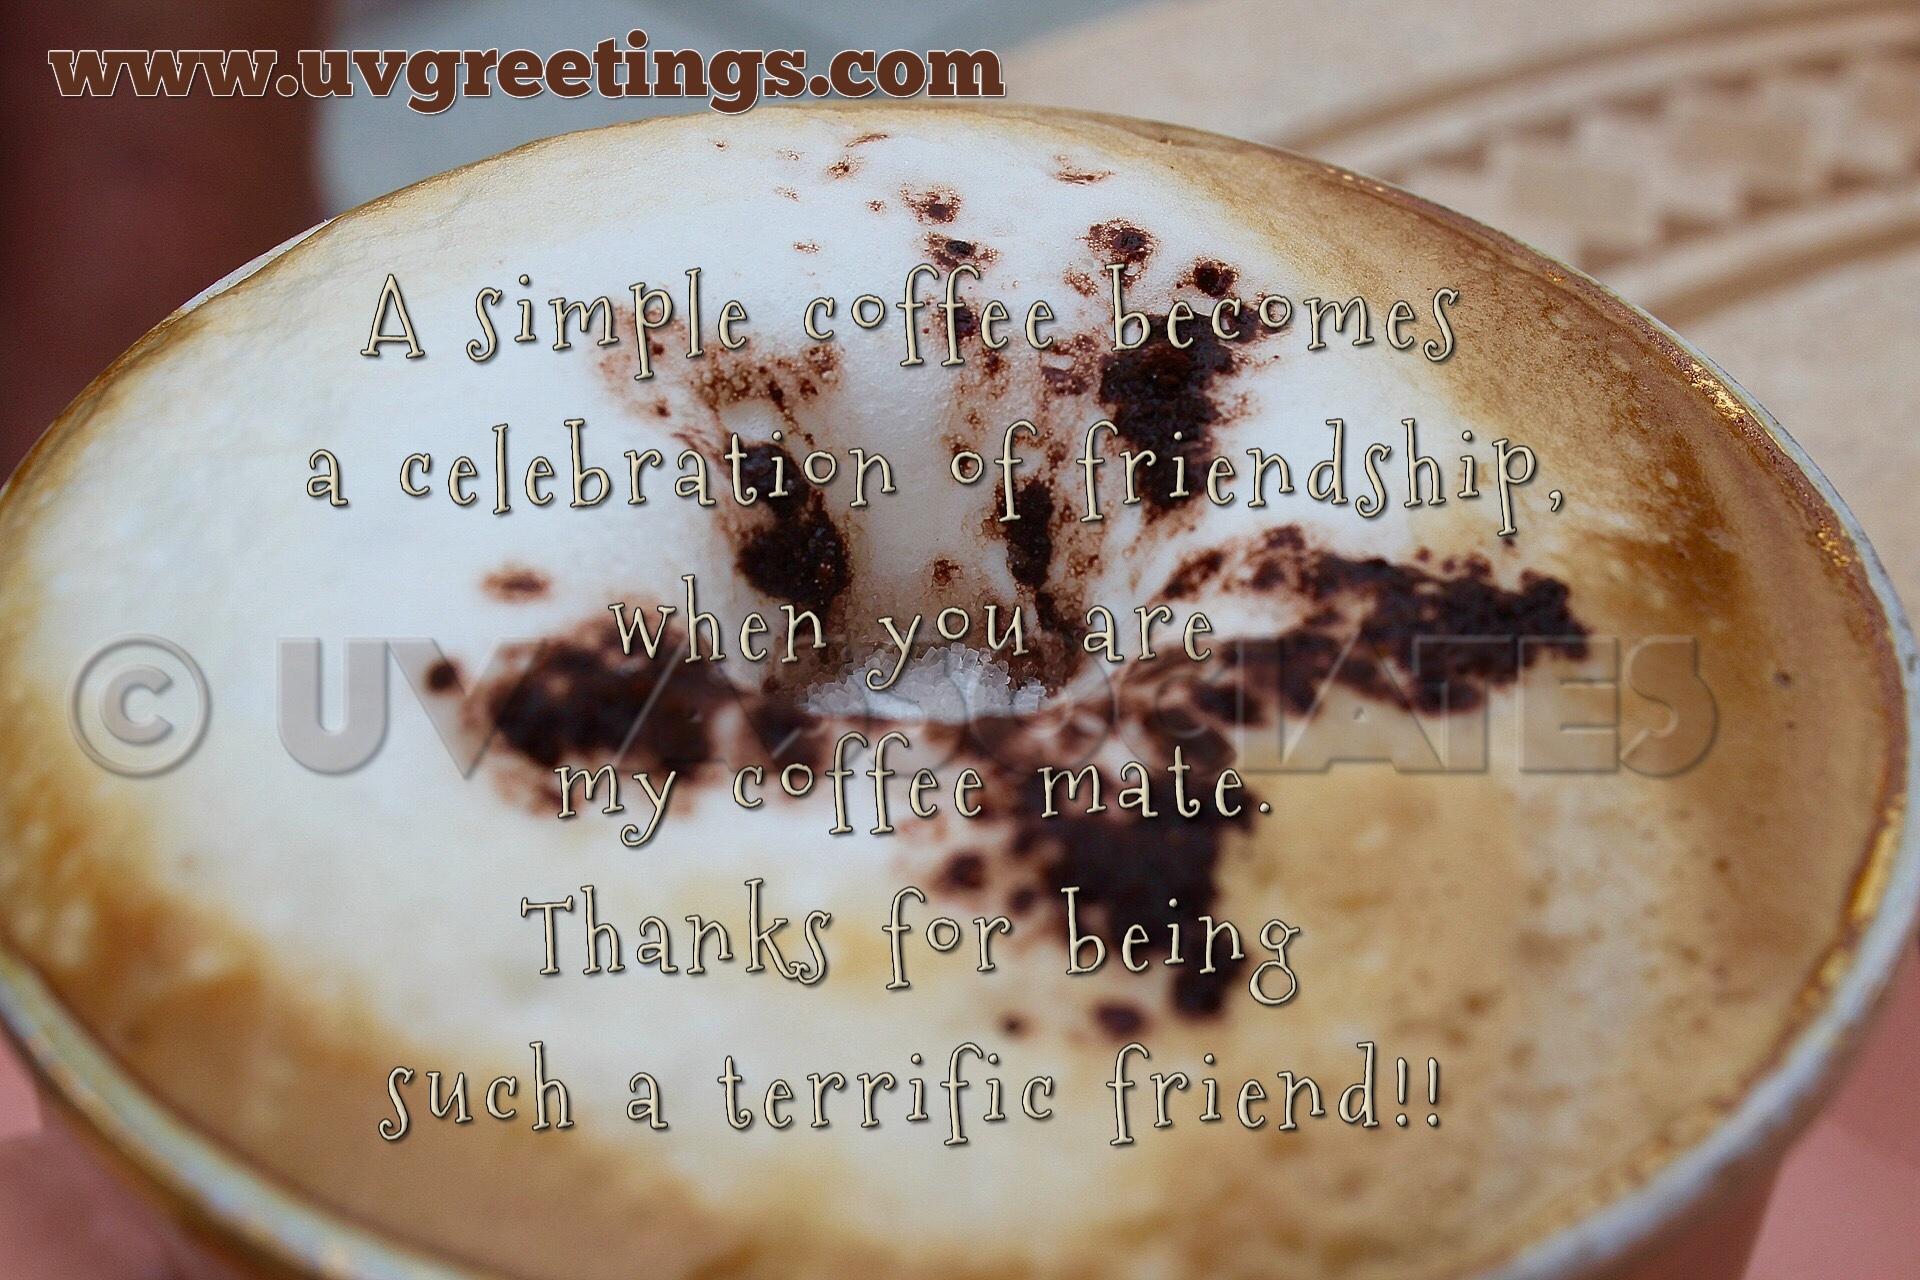 Thank You friend eCard - Coffee Cup becomes Celebration 